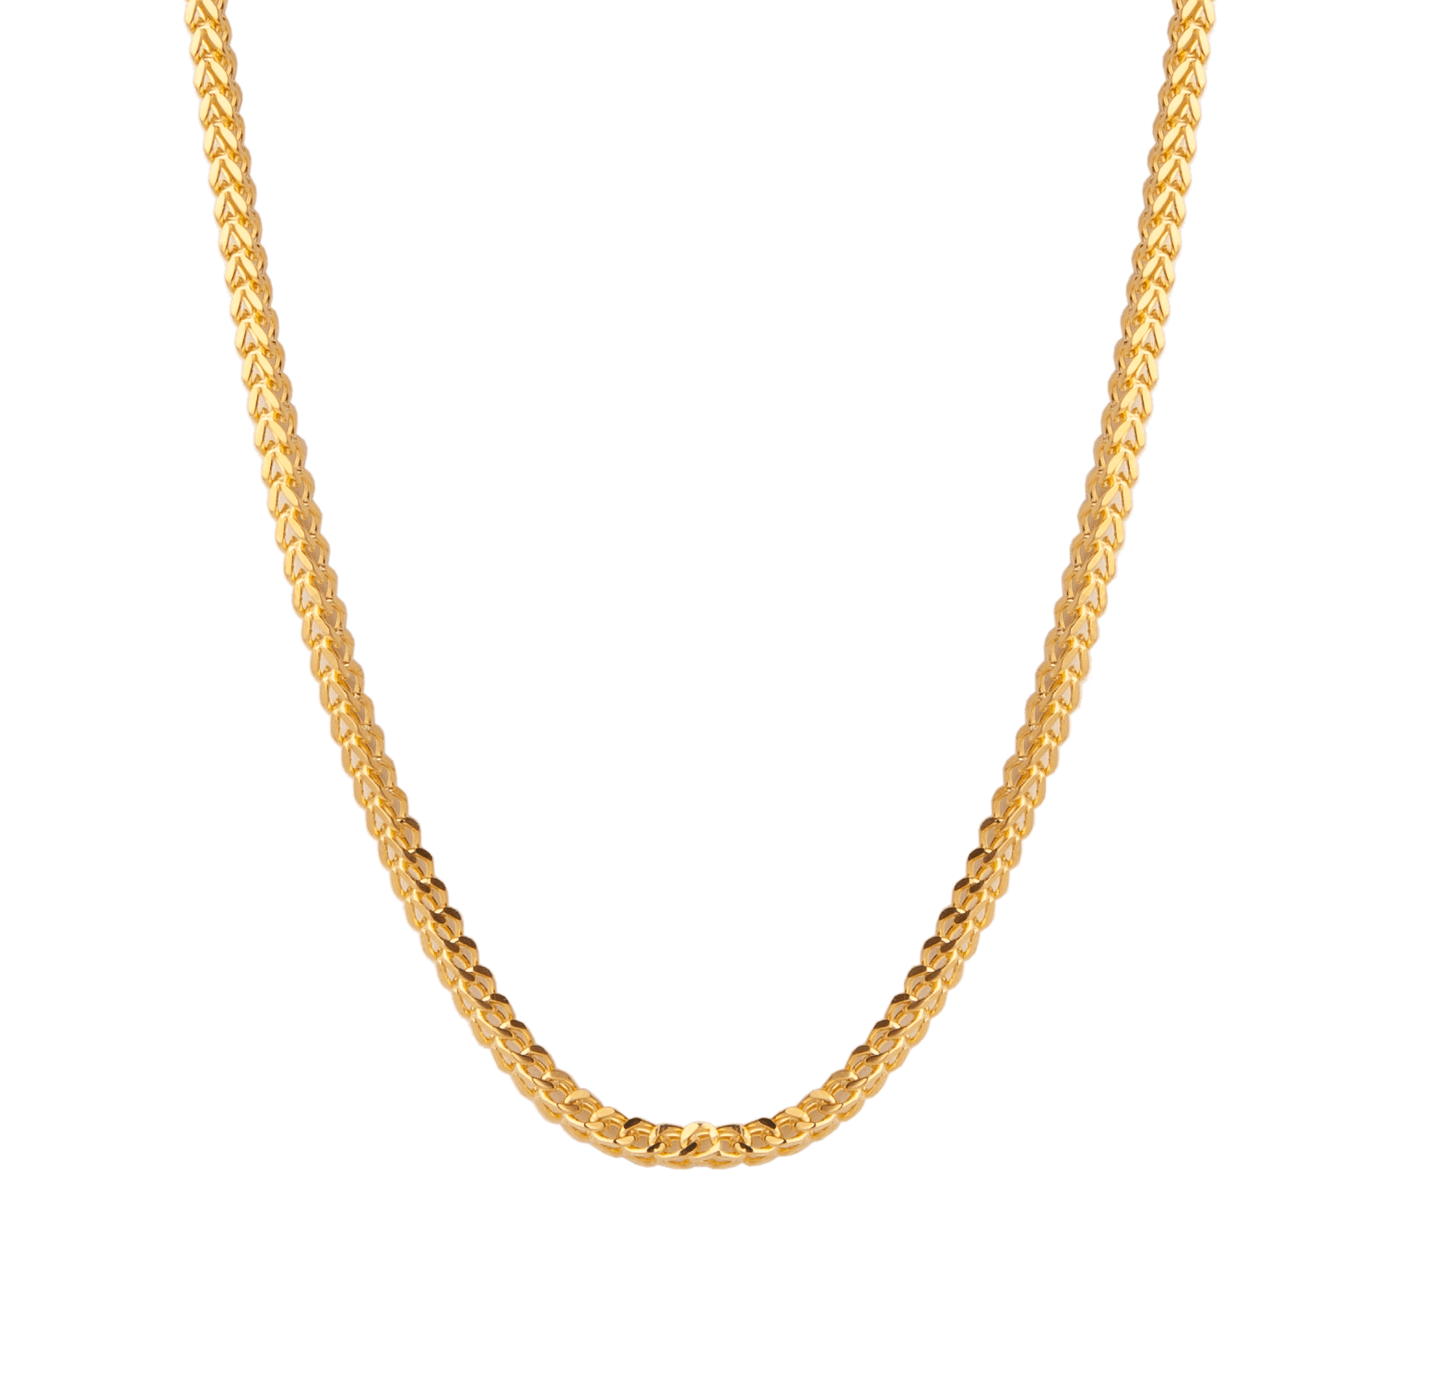 2.5 mm Franco chain - gold